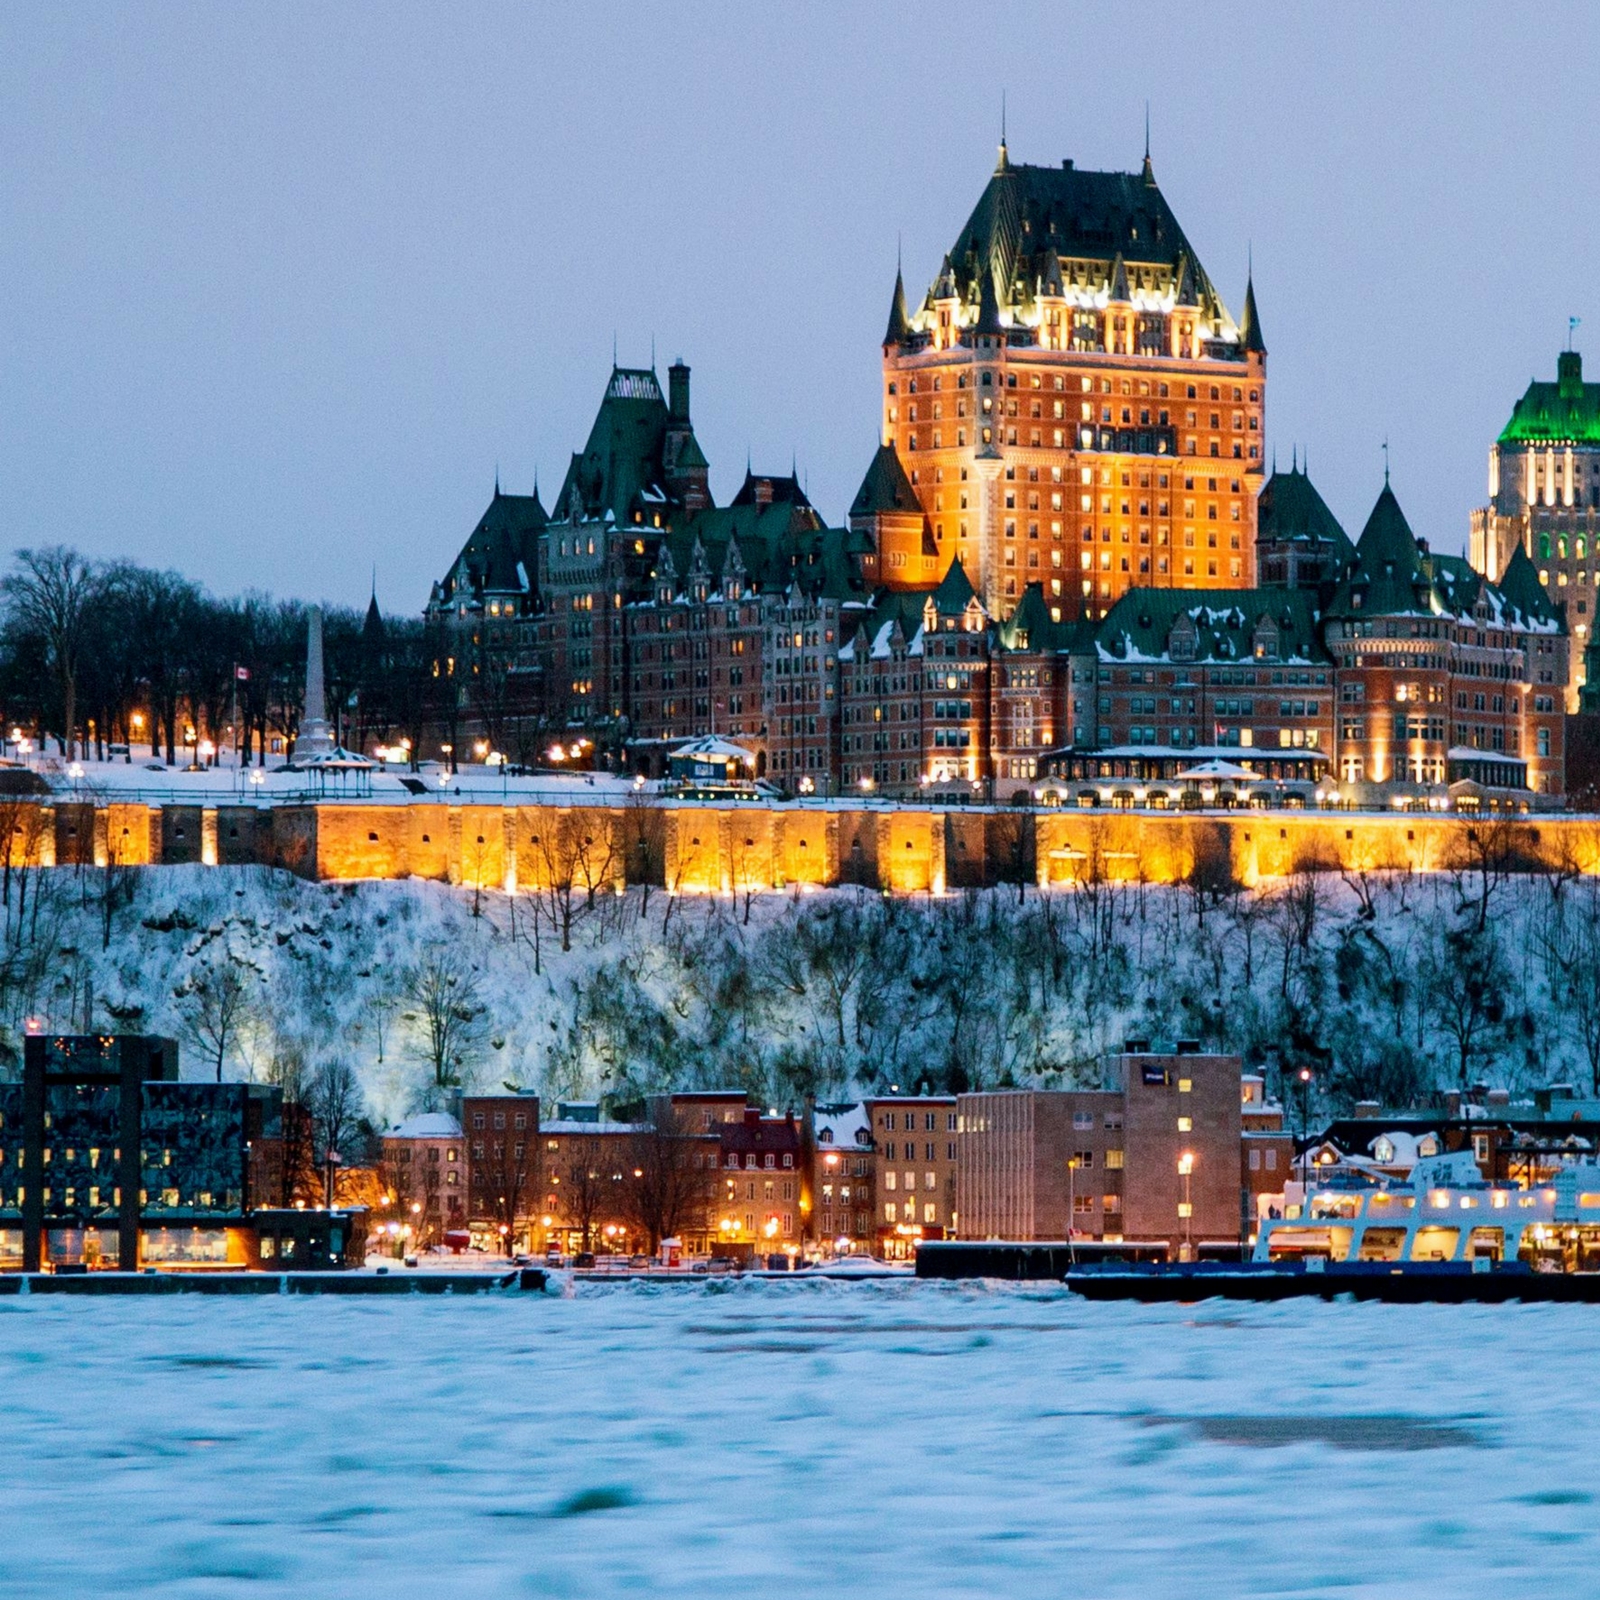 Québec Premier: We’re Not Really Interested in Bitcoin Mining